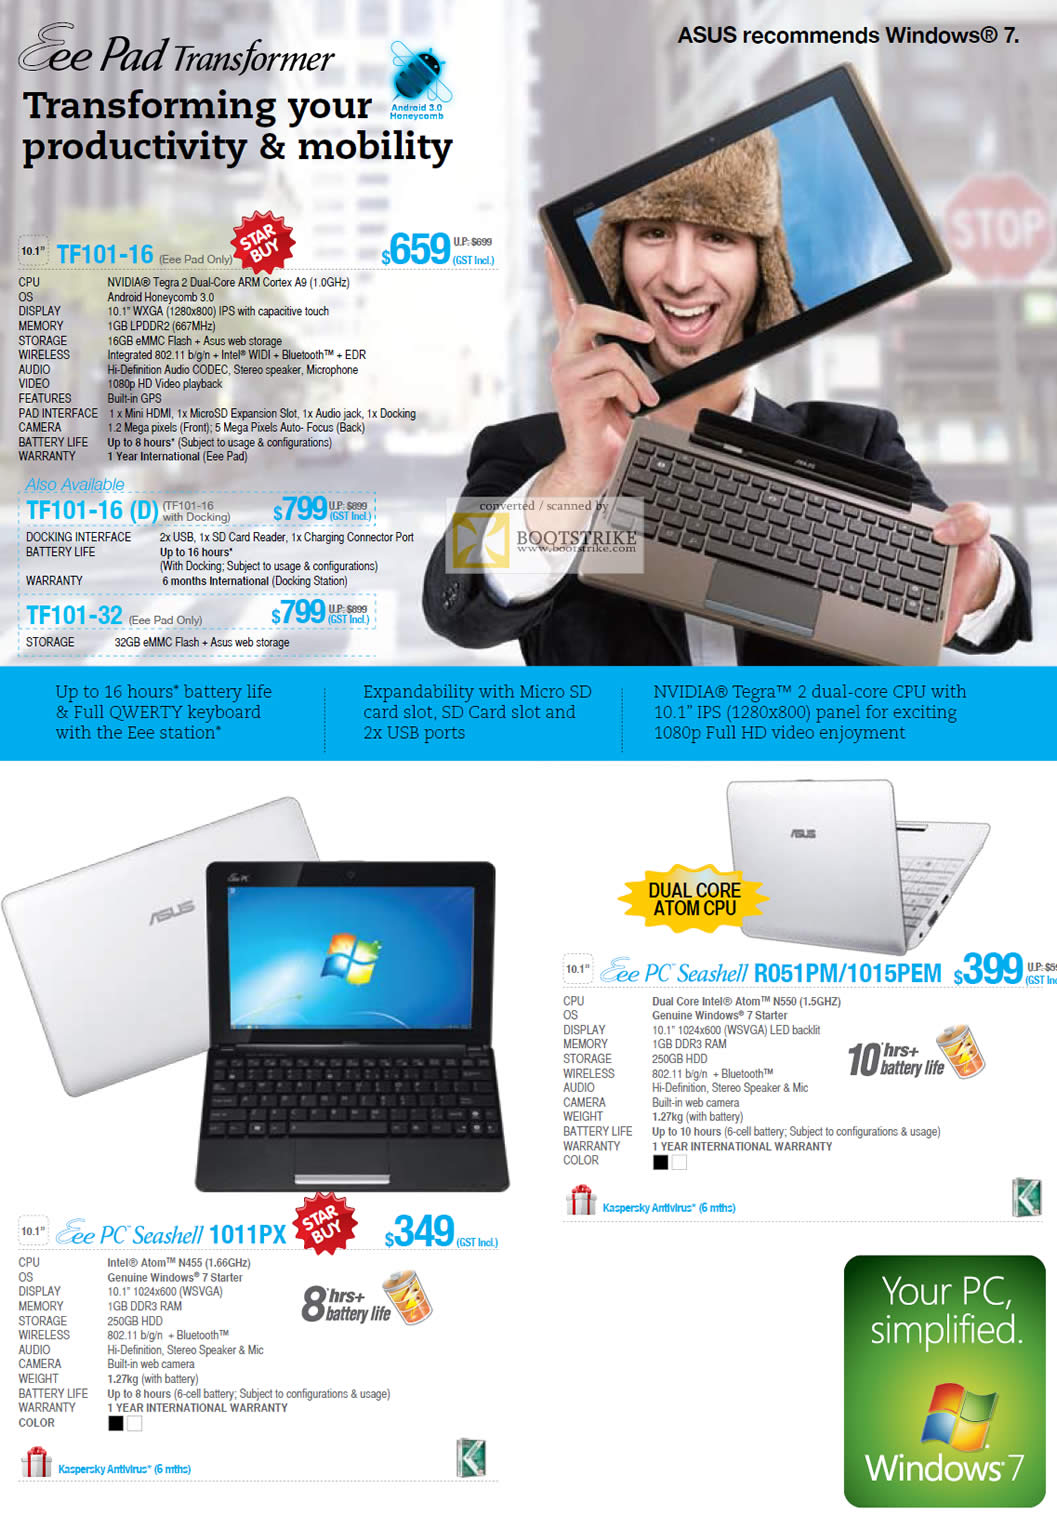 PC Show 2011 price list image brochure of ASUS Tablets Netbooks Eee Pad Transformer TF101-16 TF101-32 PC Seashell R051PM 1015PEM 1011PX